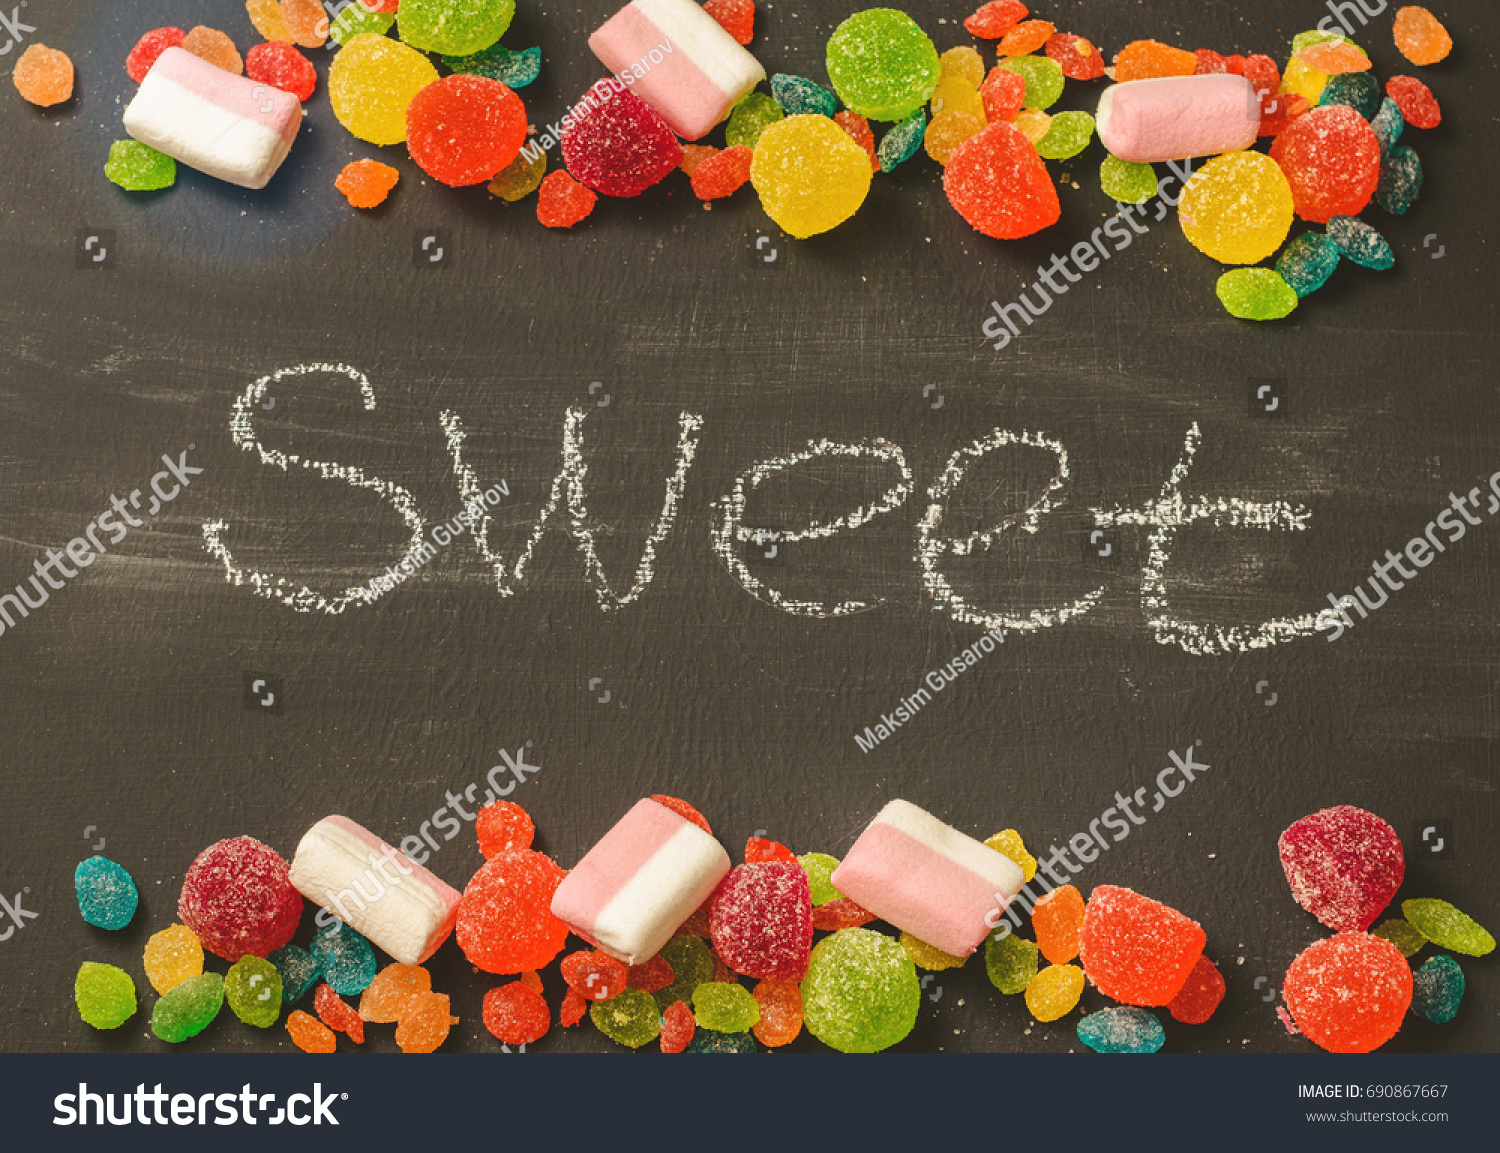 Bright colored candy, sweets, sweets on a dark background, top view #690867667